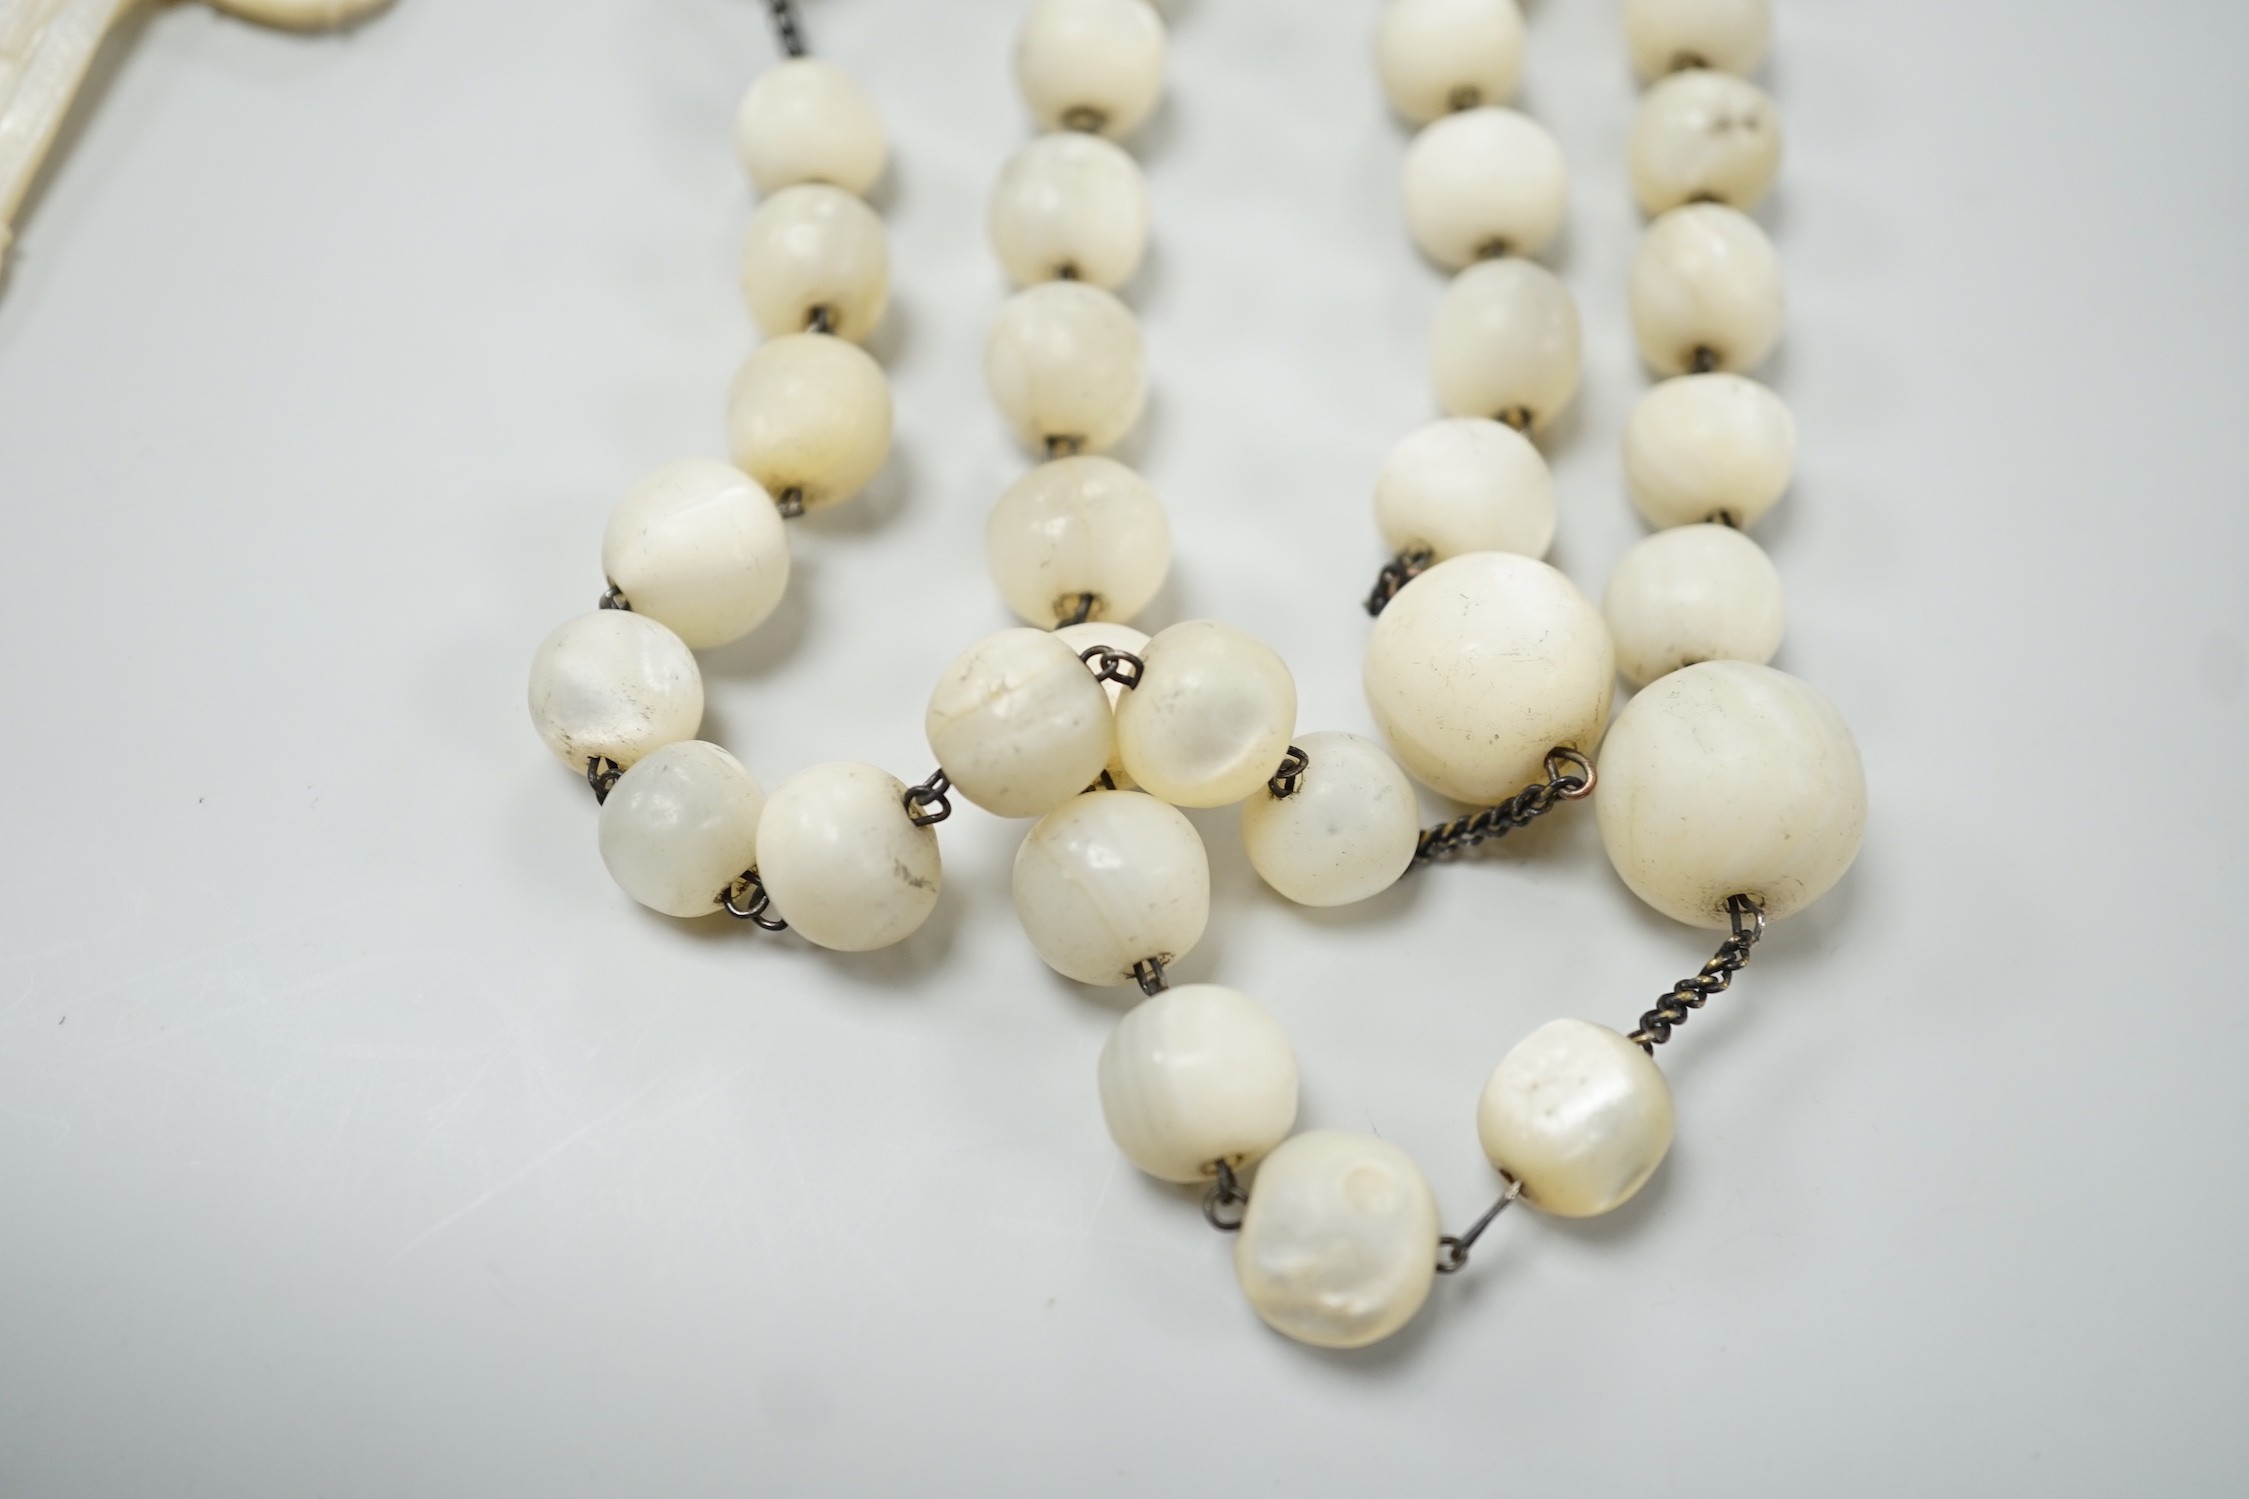 A long mother of pearl multi bead necklace, 158cm, with carved mother of pearl crucifix pendant, - Image 8 of 8